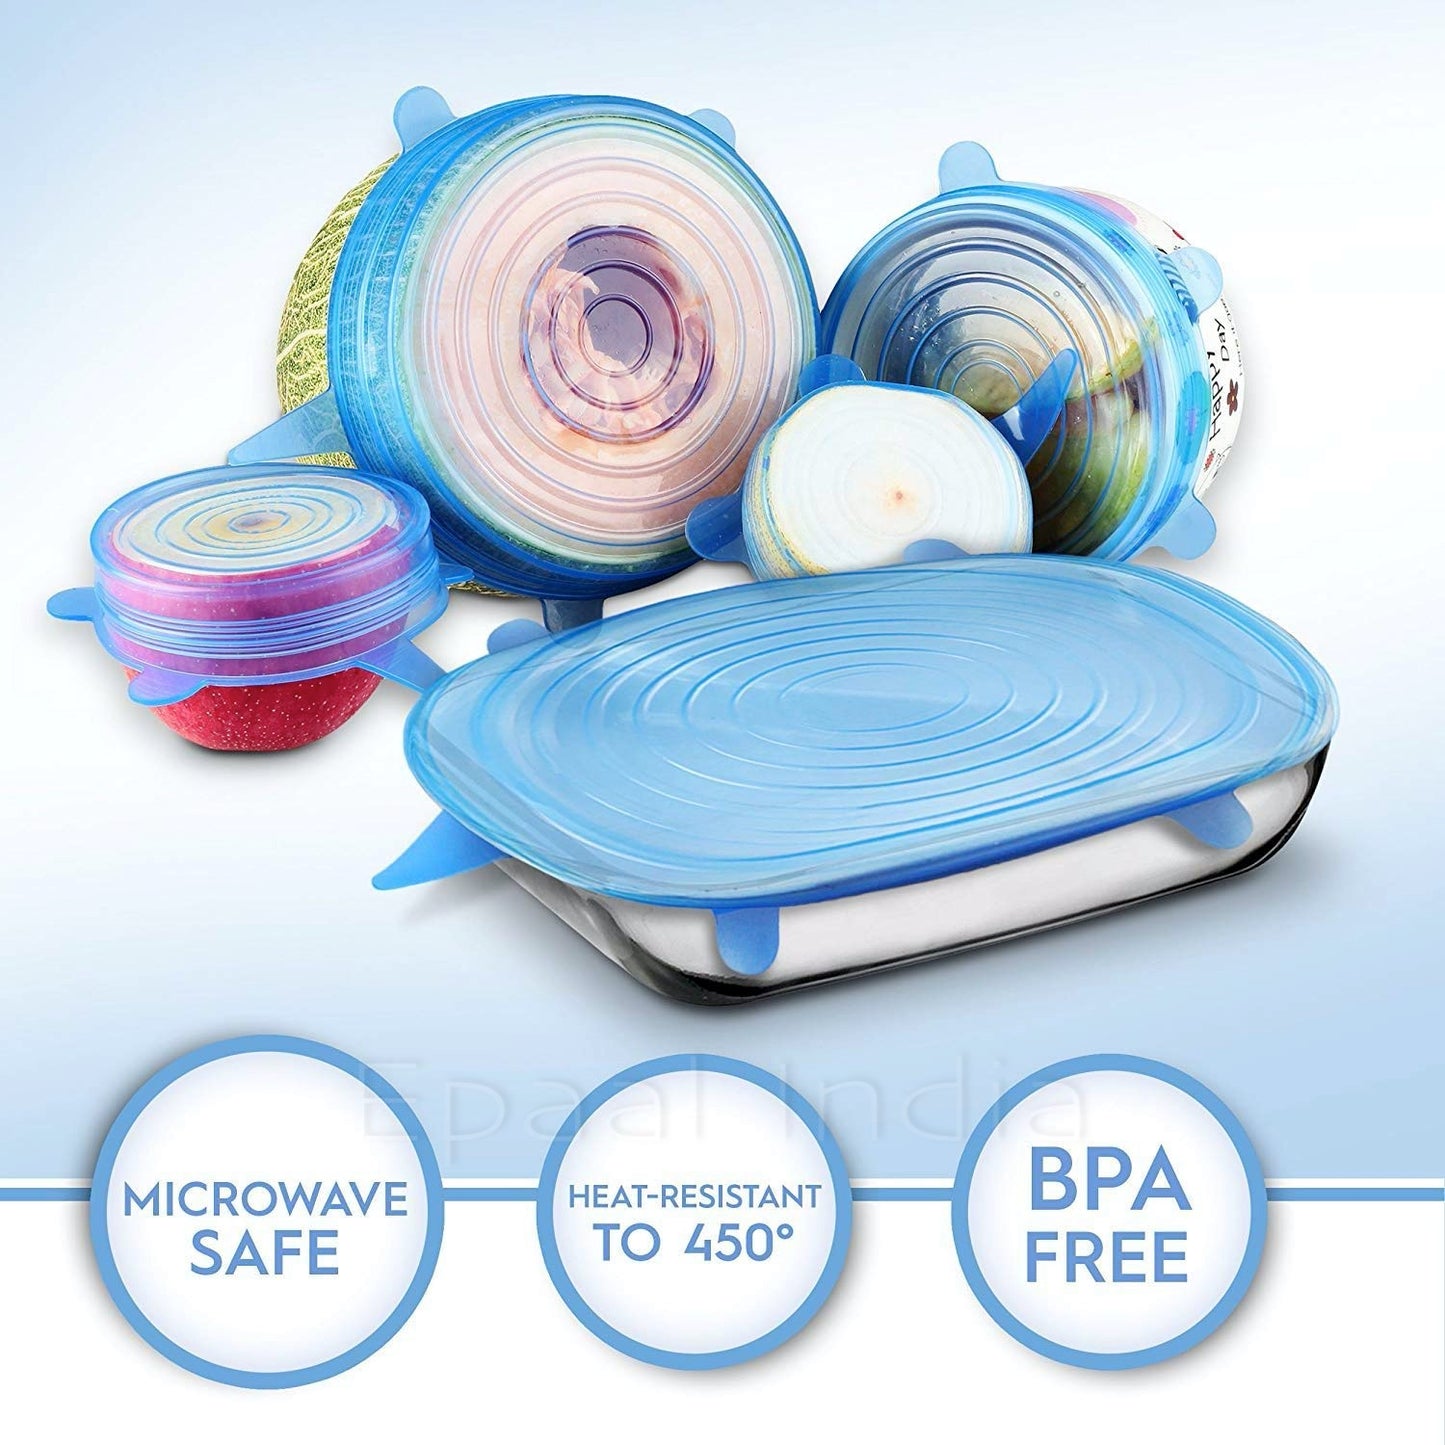 Epaal® Set of 6 Reusable Safety Silicone Stretch Dishwasher Lids Flexible Covers